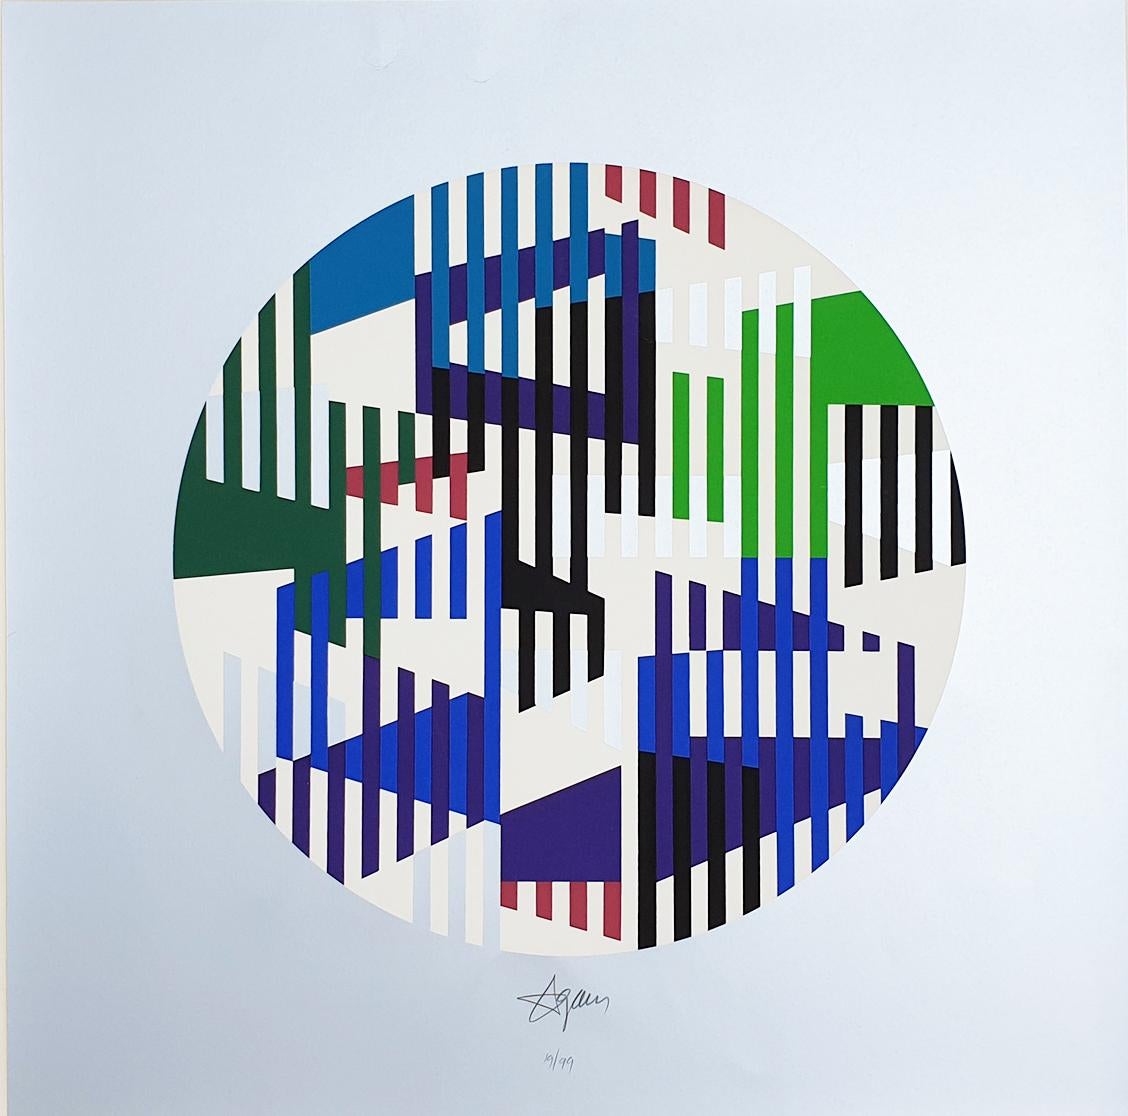 Yaacov Agam
"Untitled silver
1979
Silkscreen signed in pencil
Numbered 19/99 copies
Size of the work : 75.5 x 75.5 cm
Image size: 61 x 61 cm 
Perfect condition
Selling price: 1500 euros 
Yaacov Agam
" Untitled " silver
1979
Sérigraphie signée au